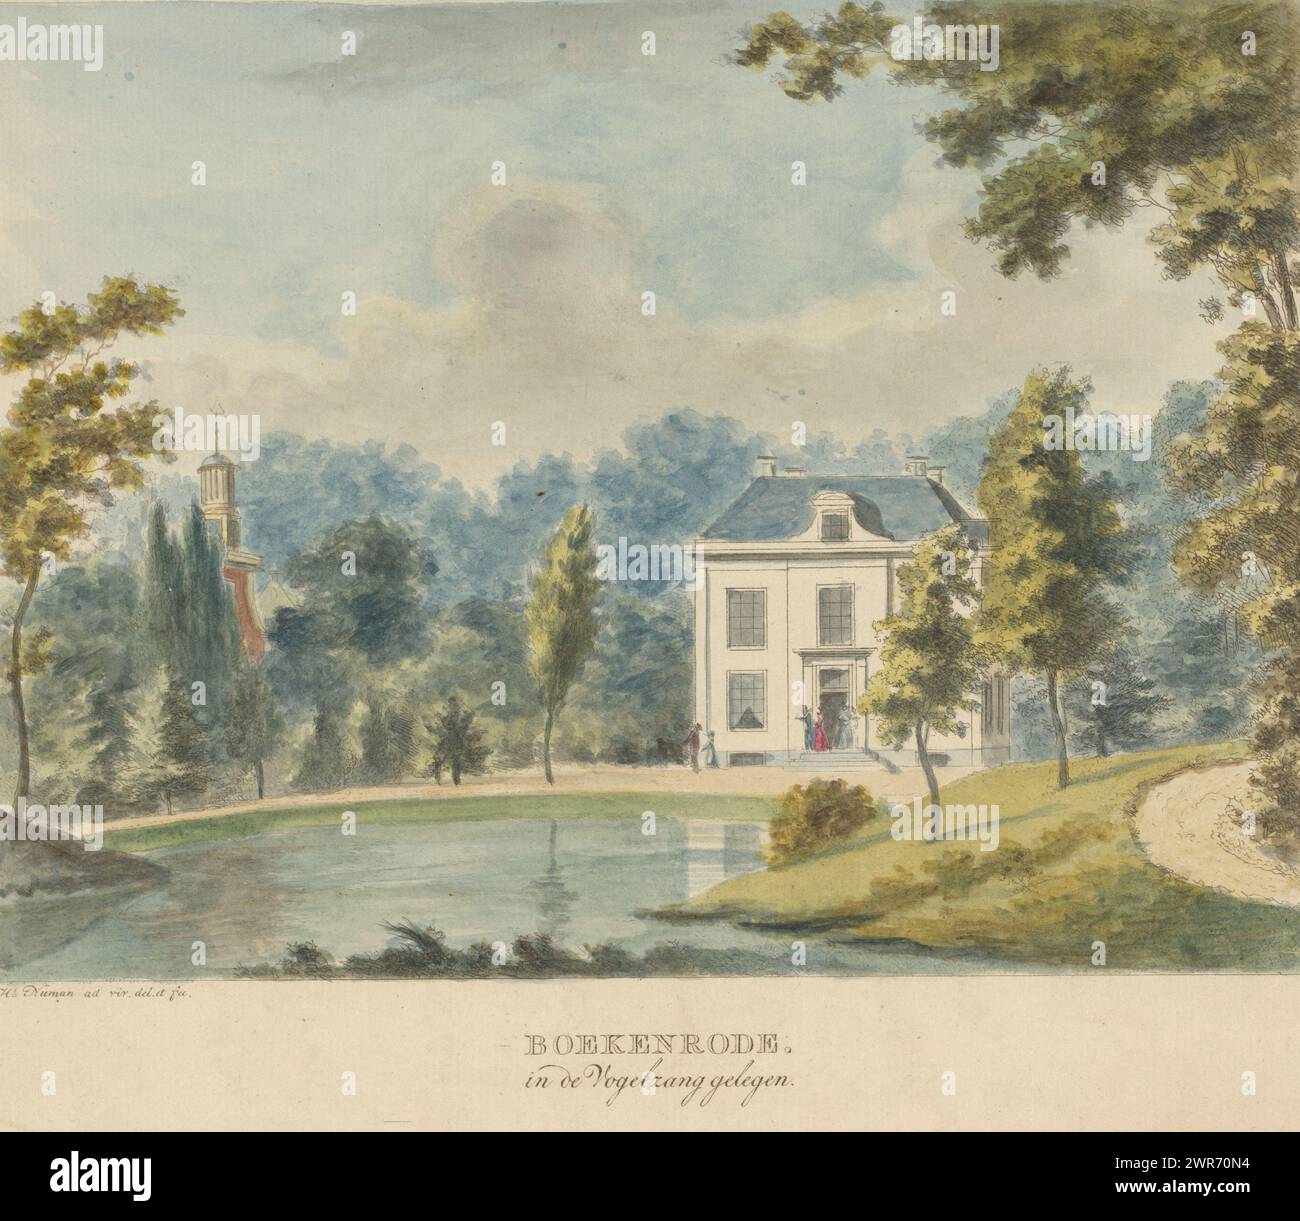 Boekenrode country estate, Boekenrode located in the Vogelzang (title on object), View of the Boekenrode country house in Aerdenhout. The country house is located in a landscape park by a pond., print maker: Hermanus Numan, after drawing by: Hermanus Numan, Netherlands, 1790 - 1797, paper, etching, height 226 mm × width 266 mm, print Stock Photo